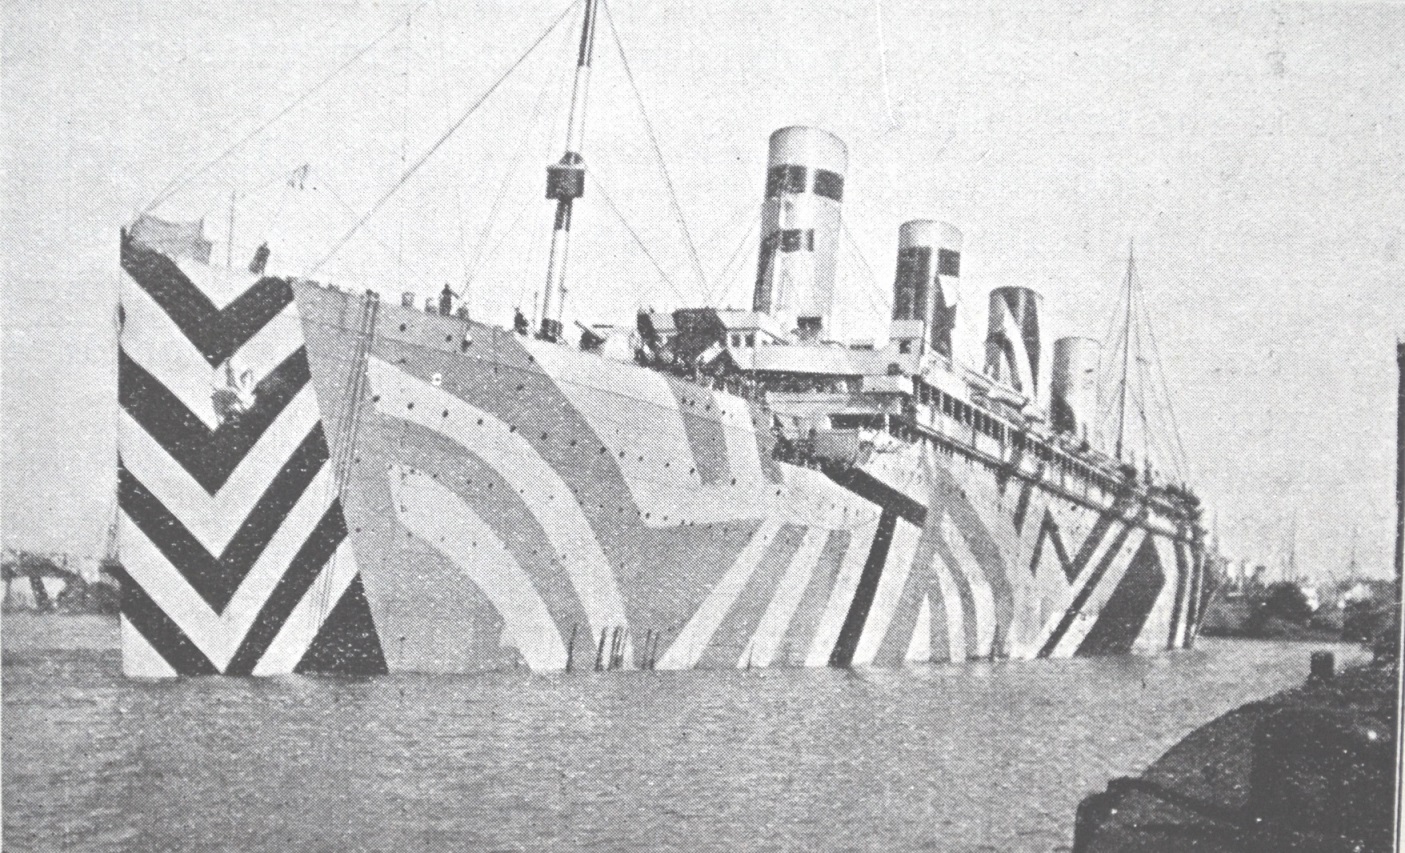 7. Photograph of the port side of RMS Olympic used by Wilkinson. This image illustrates very well the principle of carrying the starboard side design around the bow.